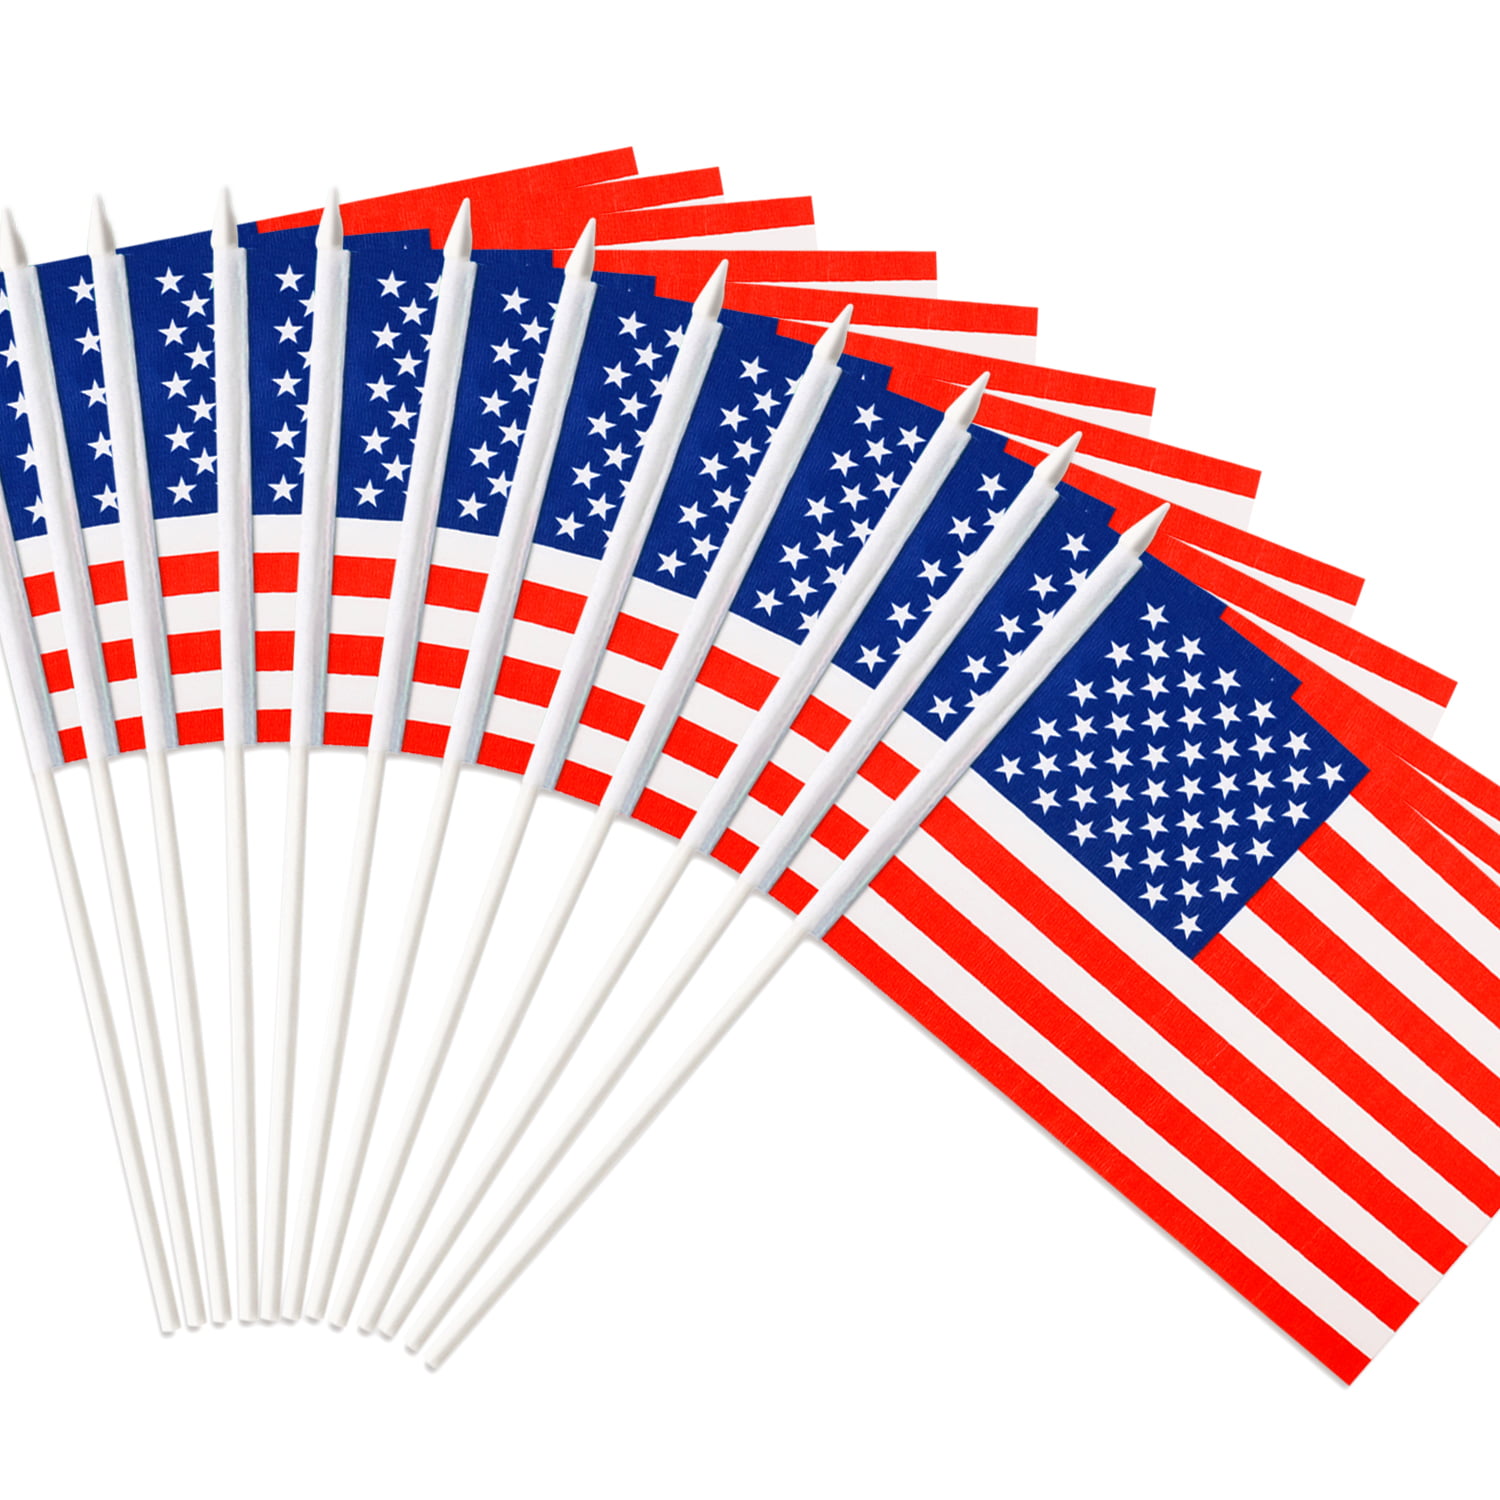 12 Pack Small Mini US American Flags on Stick 4x6 Inch Hand Held Stick Flags 